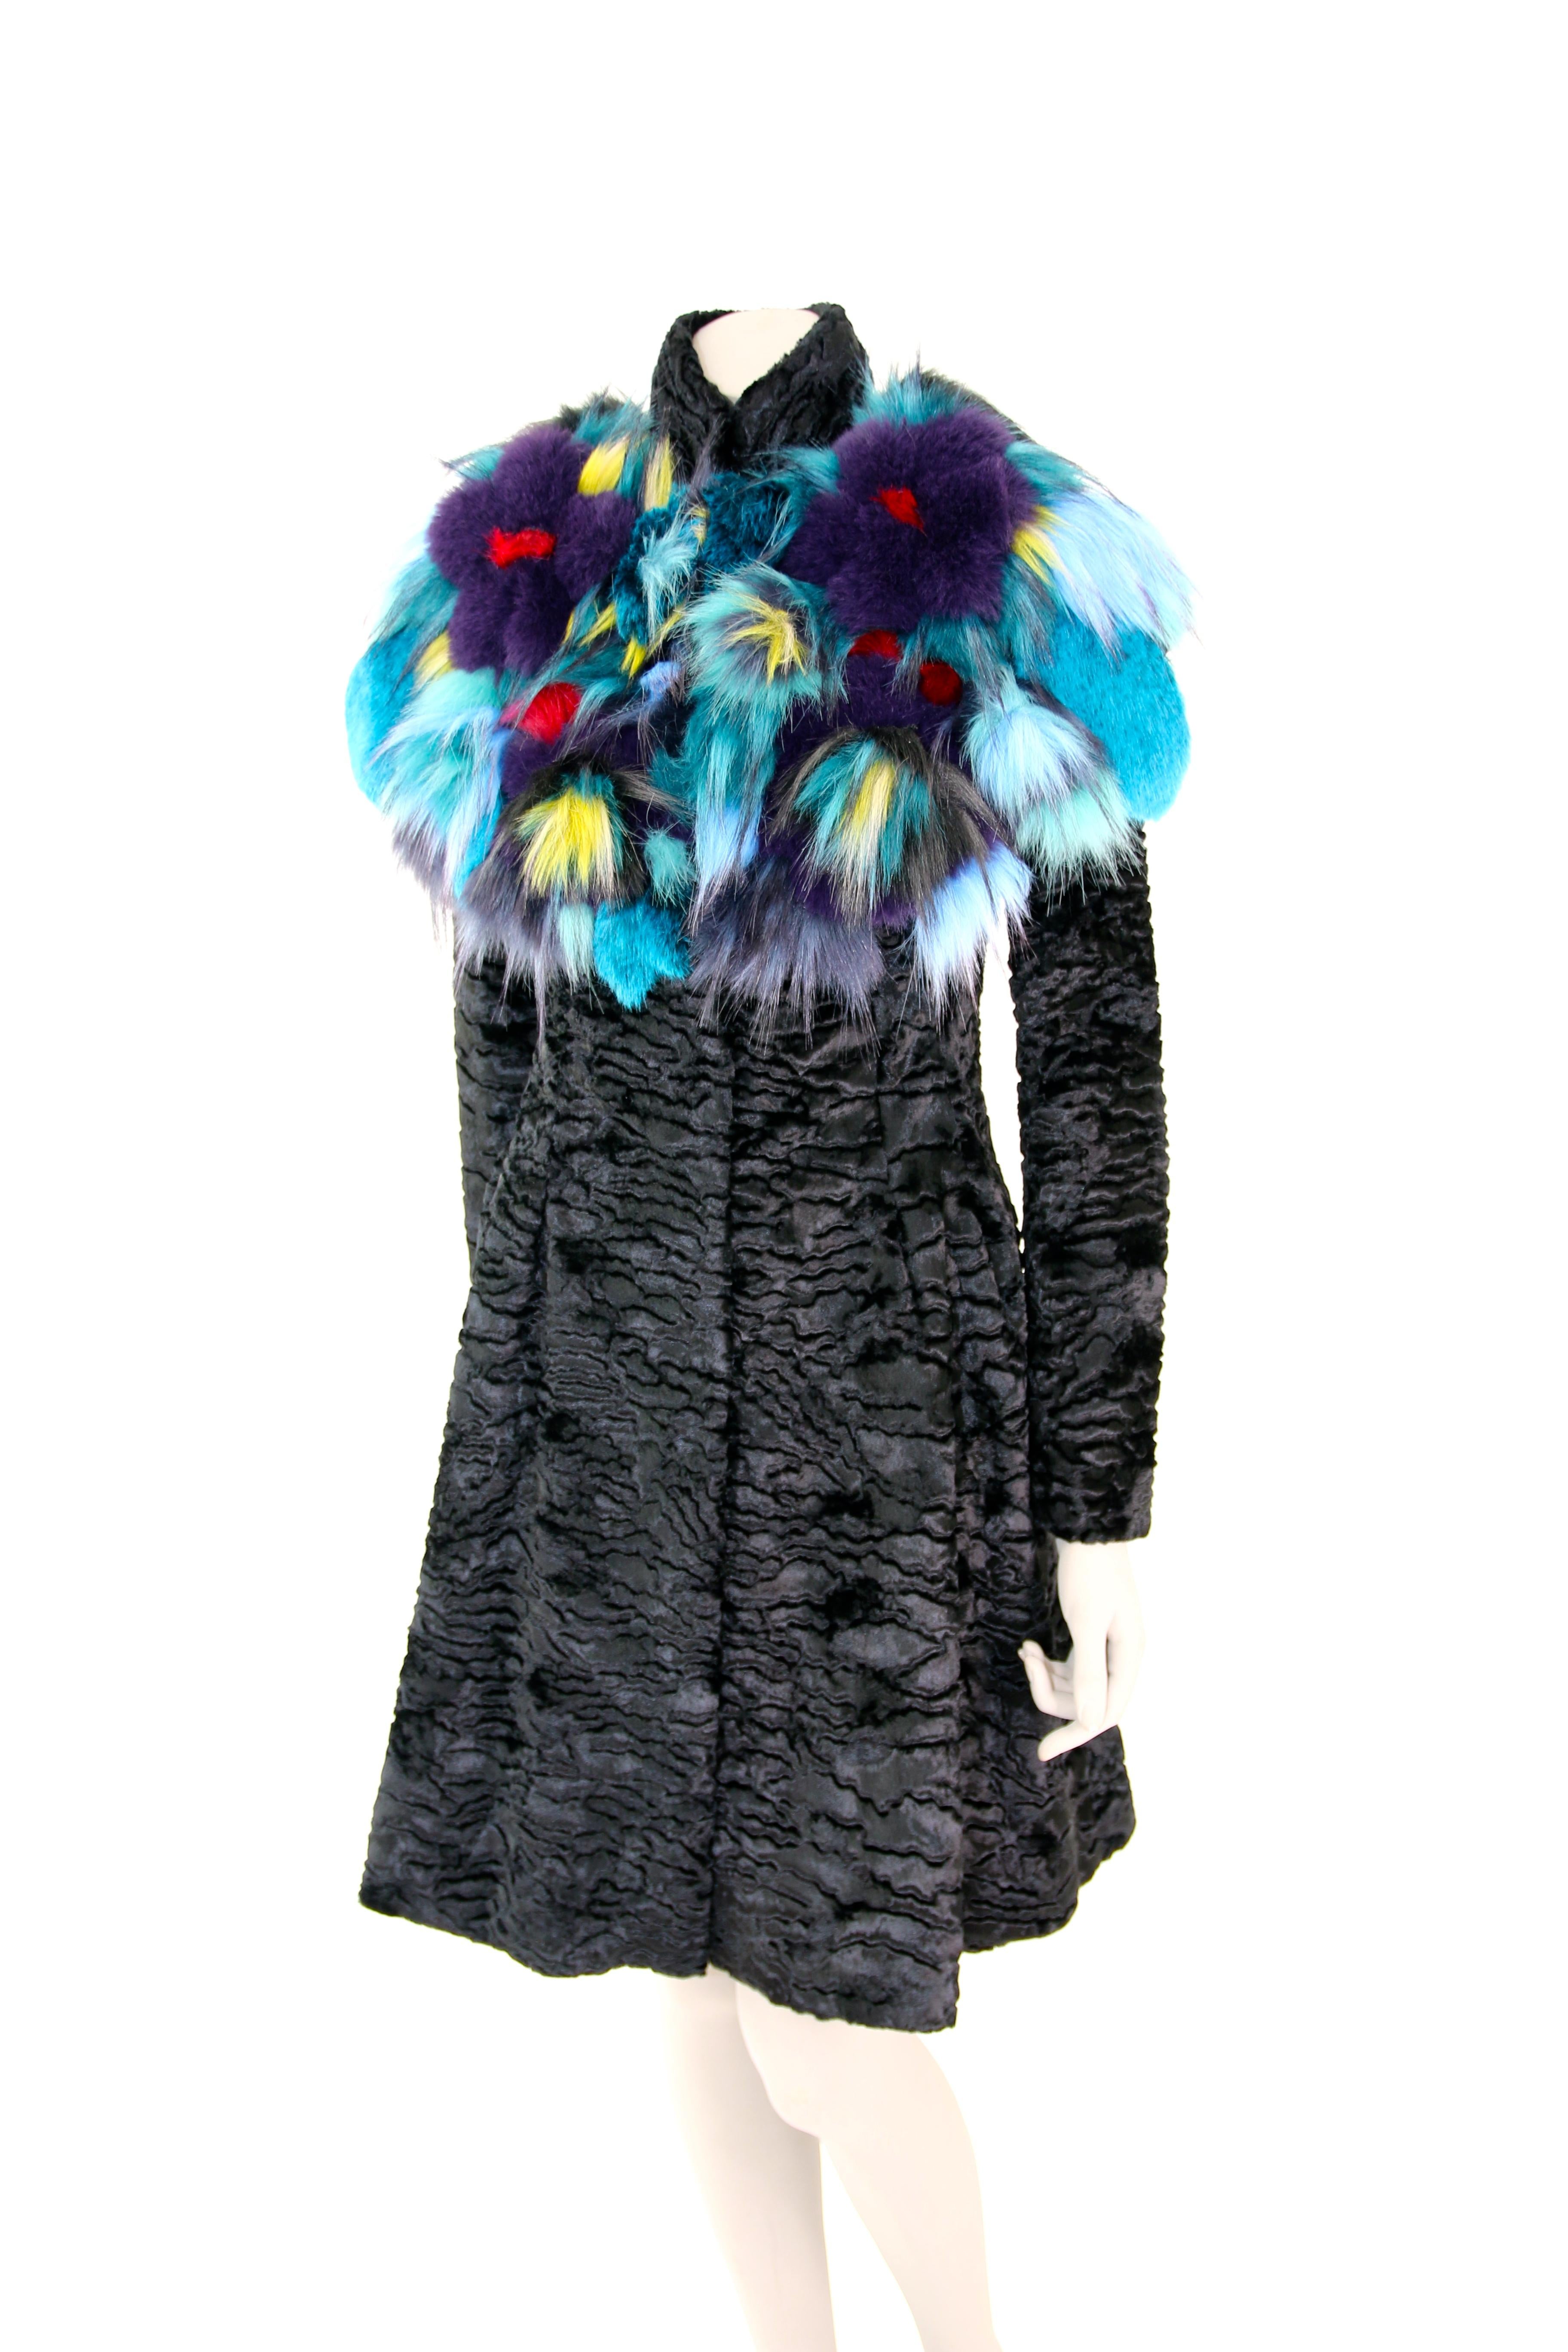 Pelush Botanical Faux Fur Collar With Three Dimensional Flowers - One Size In New Condition For Sale In Greenwich, CT